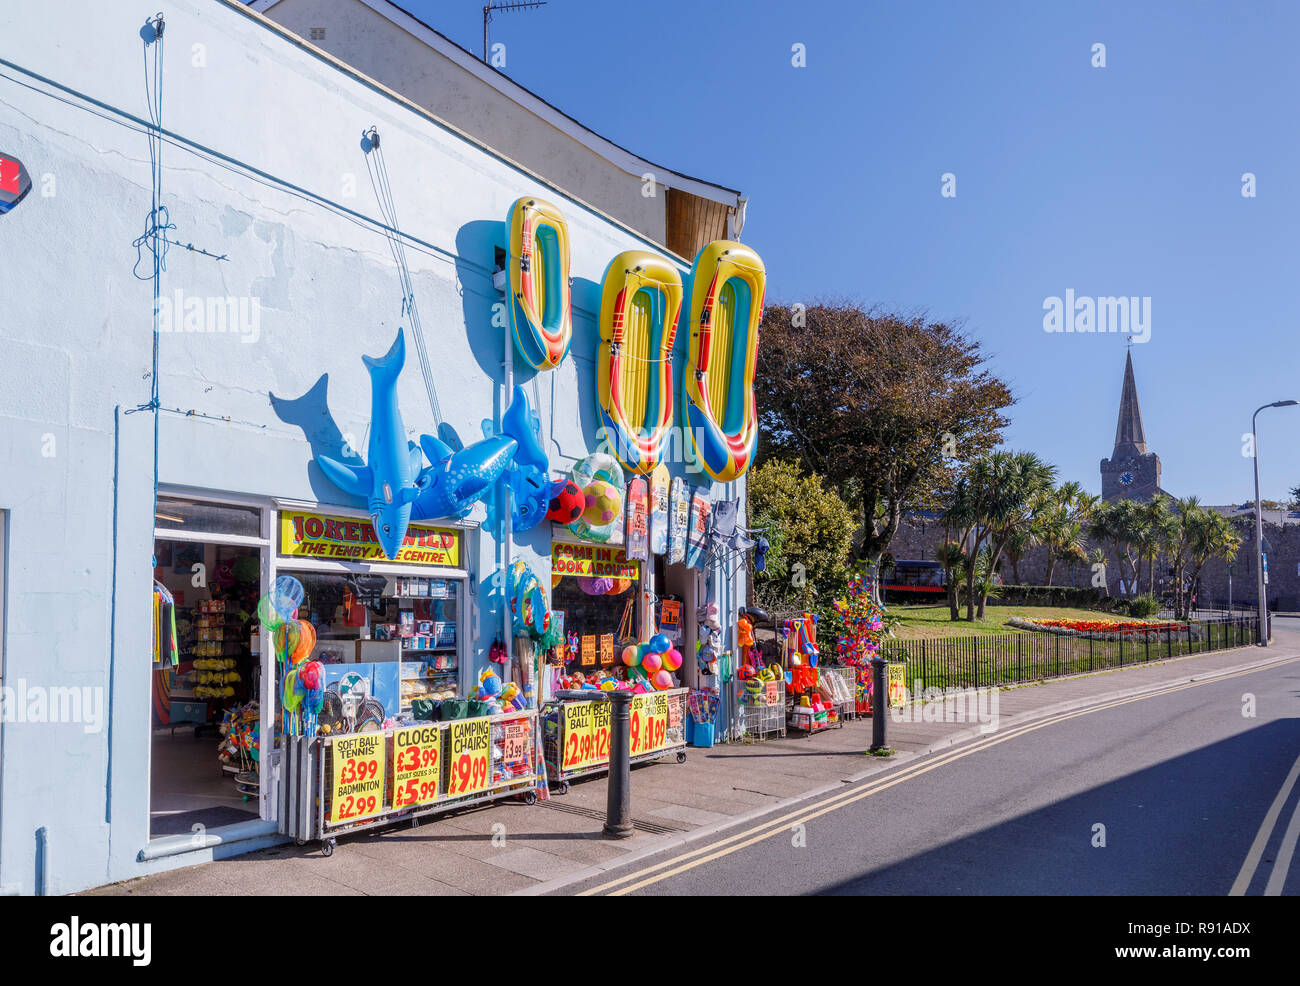 Display of colourful blow-up beach toys in a shop in Tenby, a walled seaside town in Pembrokeshire, south Wales coast on the west of Carmarthen Bay Stock Photo